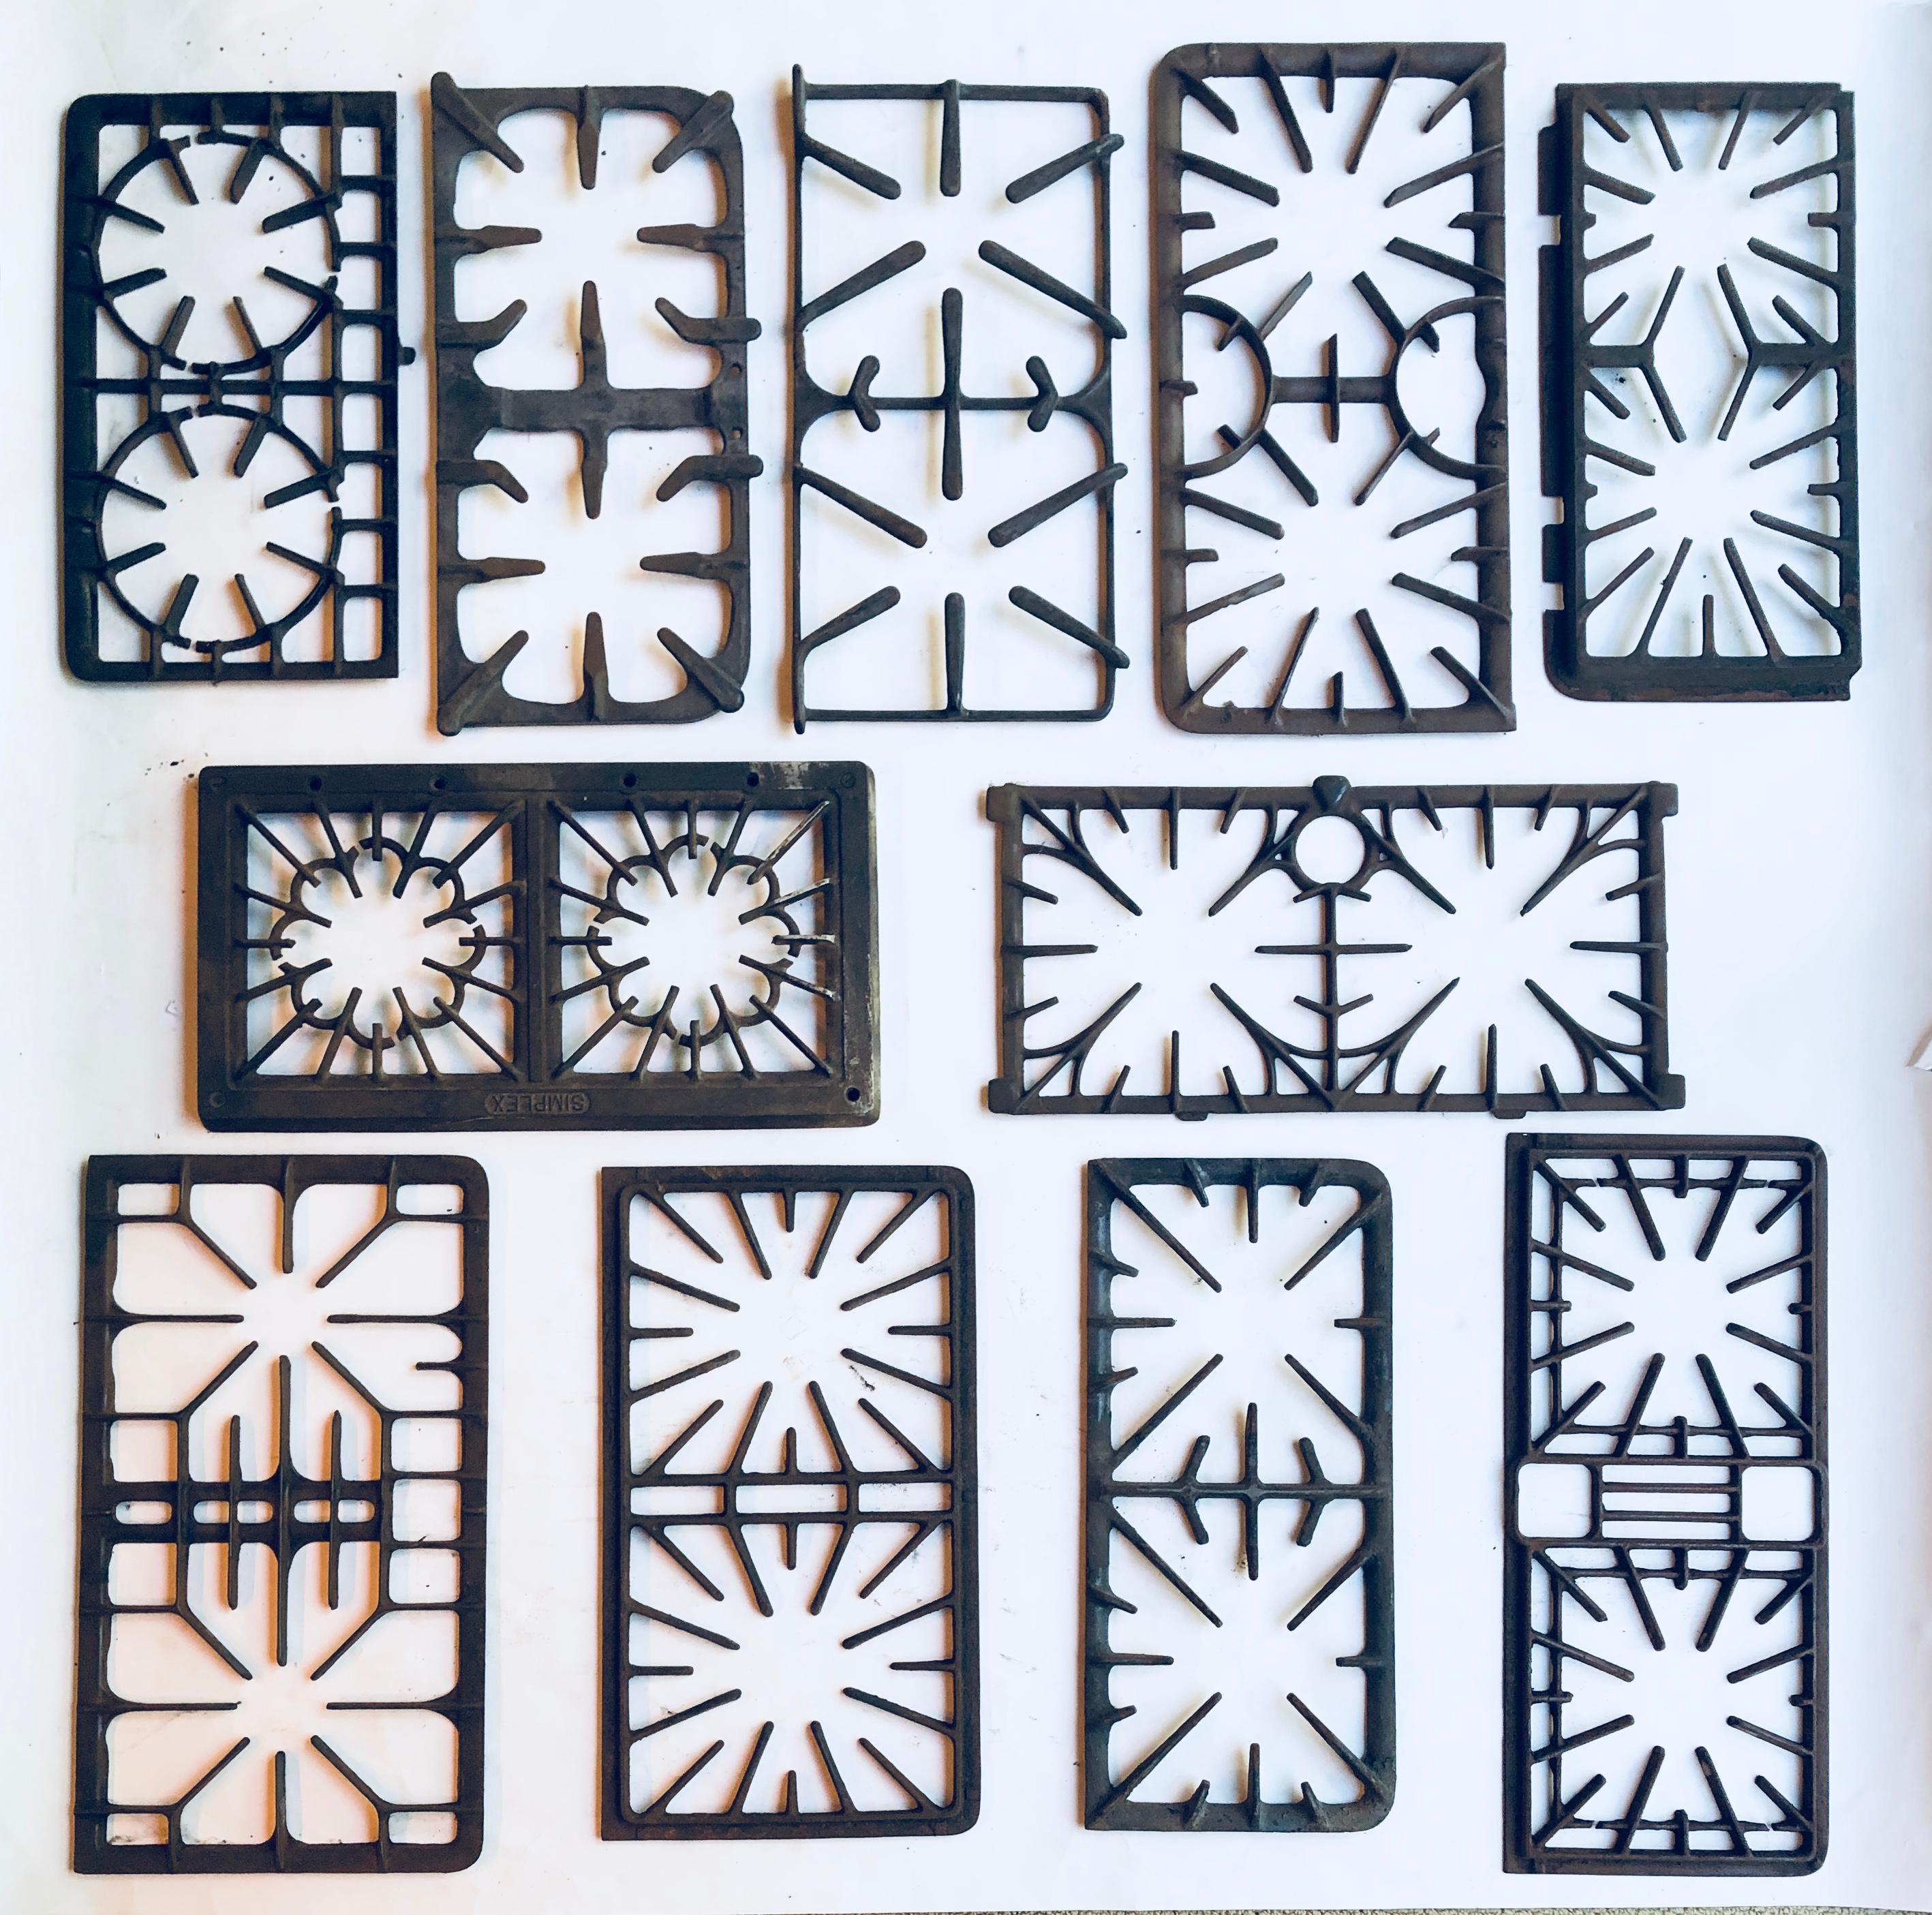 Collection of 11 rare antique cast iron stove grates, circa 1920-1950. Great for kitchen wall decoration. These measure between 16-19 inches wide and 9-10 inches height.